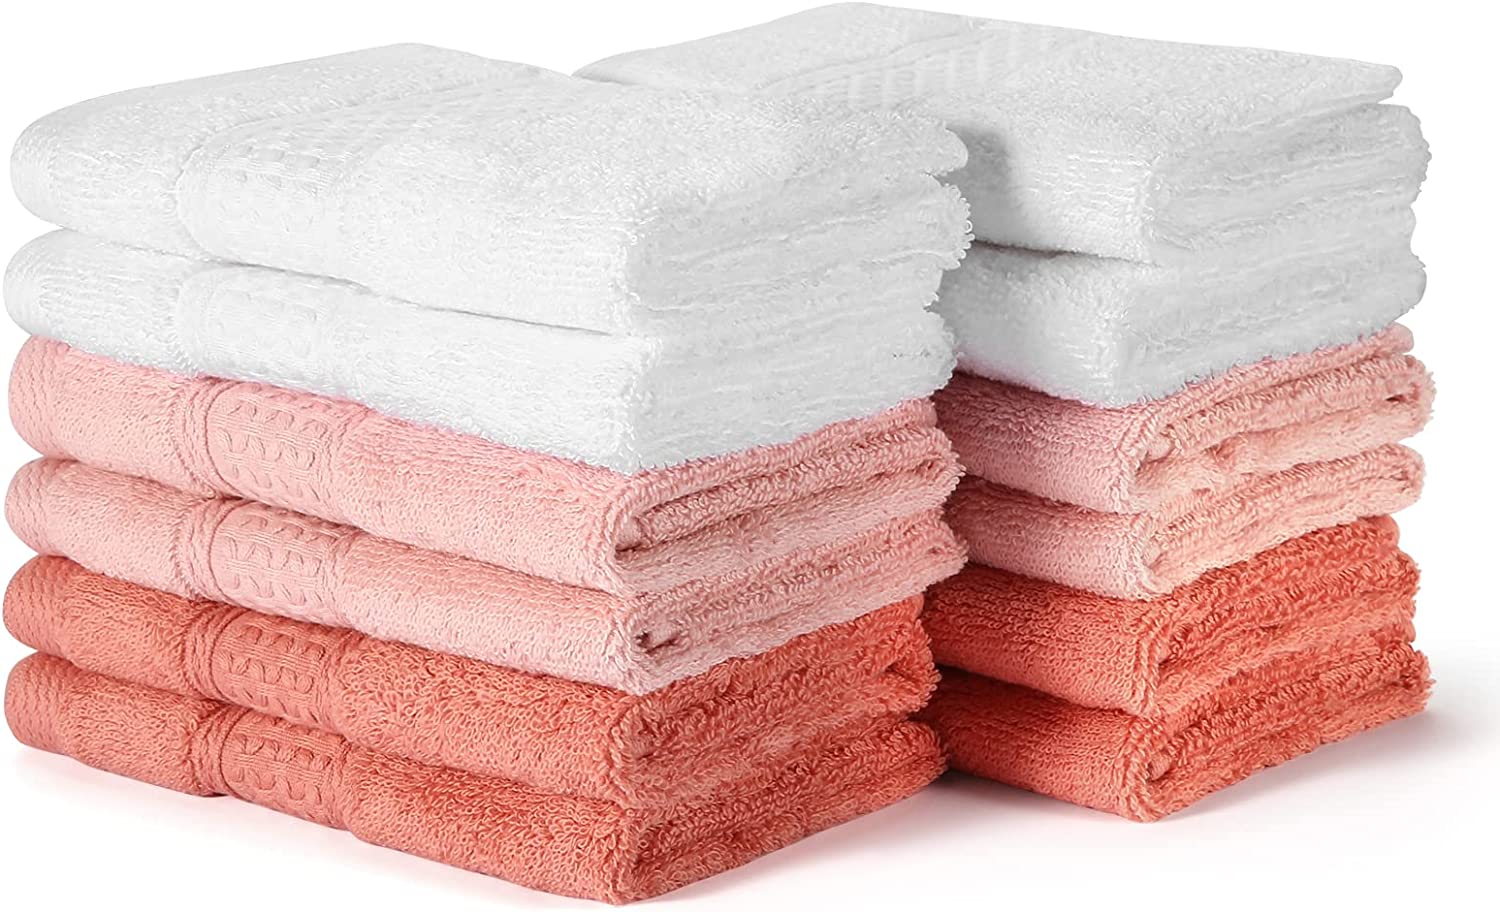 Chiicol Cotton Wash Cloths Absorbent Bath Washcloths for Body and Face - Hotel  Towels for Bathroom in